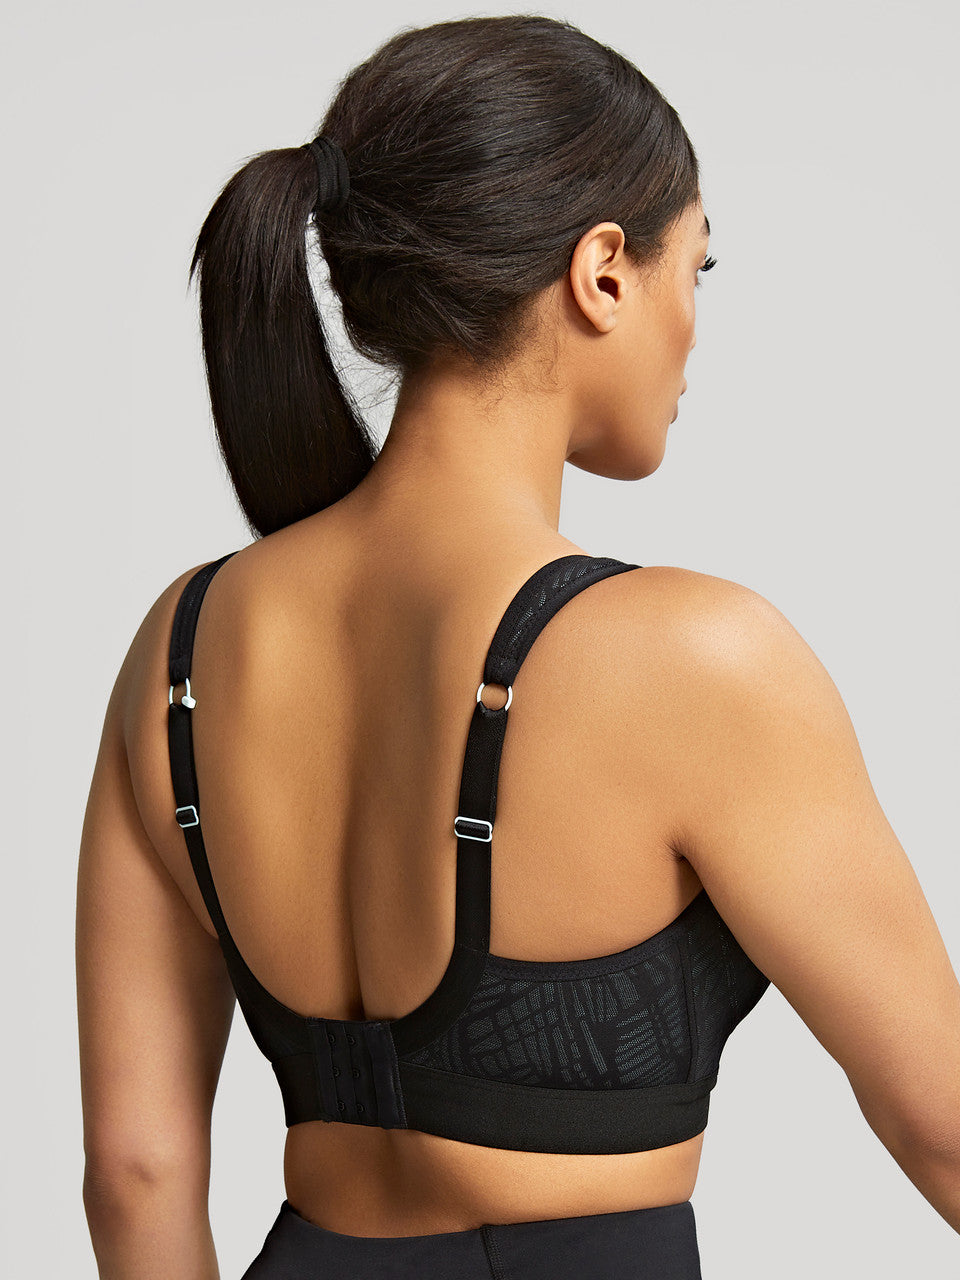 Non Wired Sports Bra - Black/Ice Blue worn by model back view